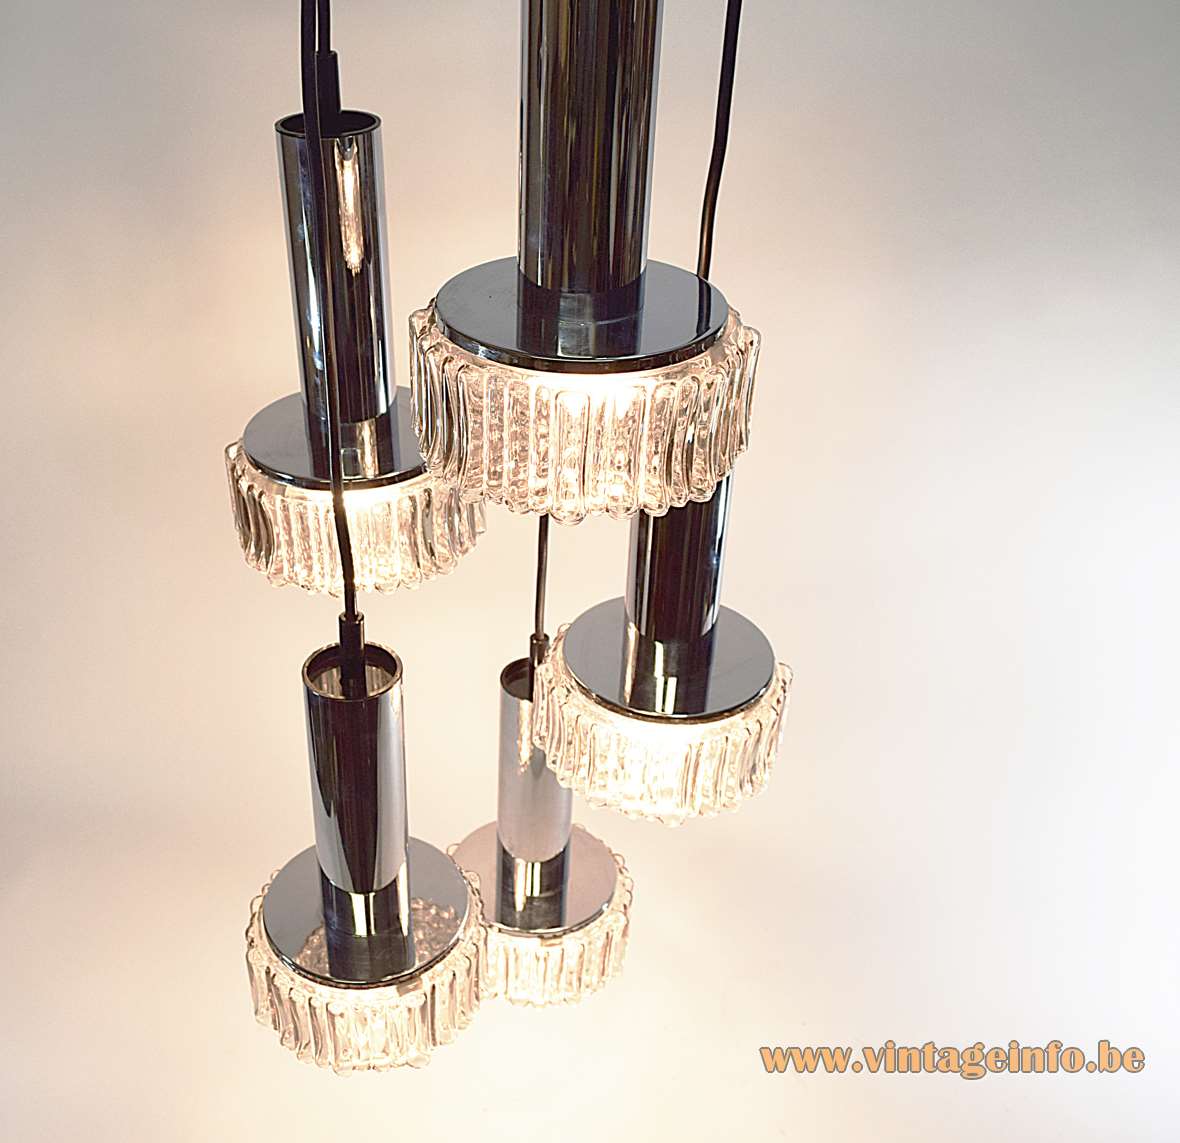 Staff bubble glass pendant chandelier cascading round smoked embossed glass lampshades chrome tubes 1960s 1970s Germany